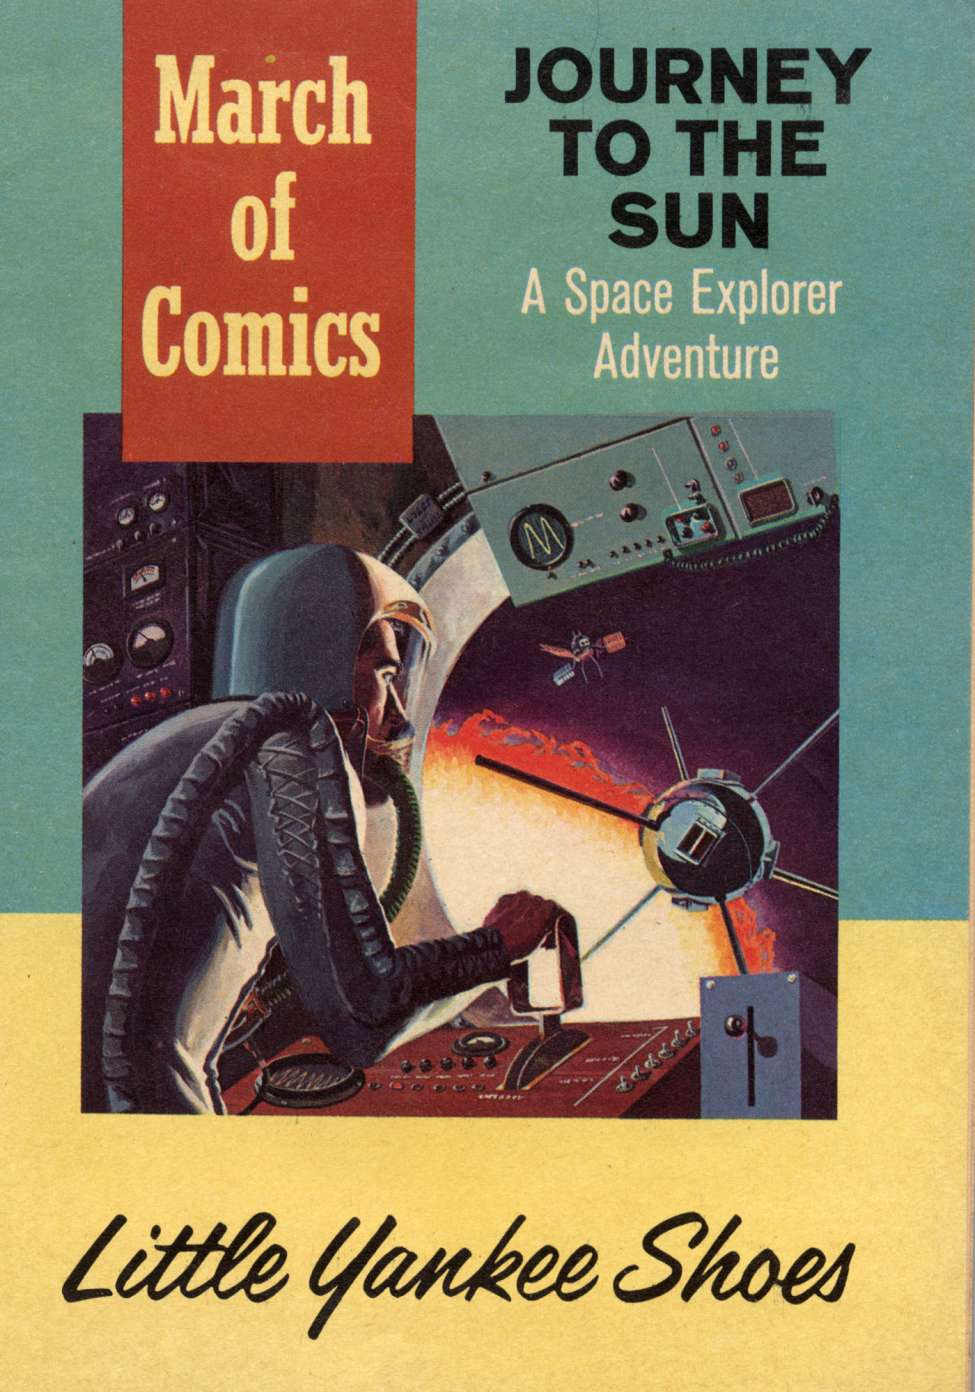 Book Cover For March of Comics 219 - Journey To The Sun